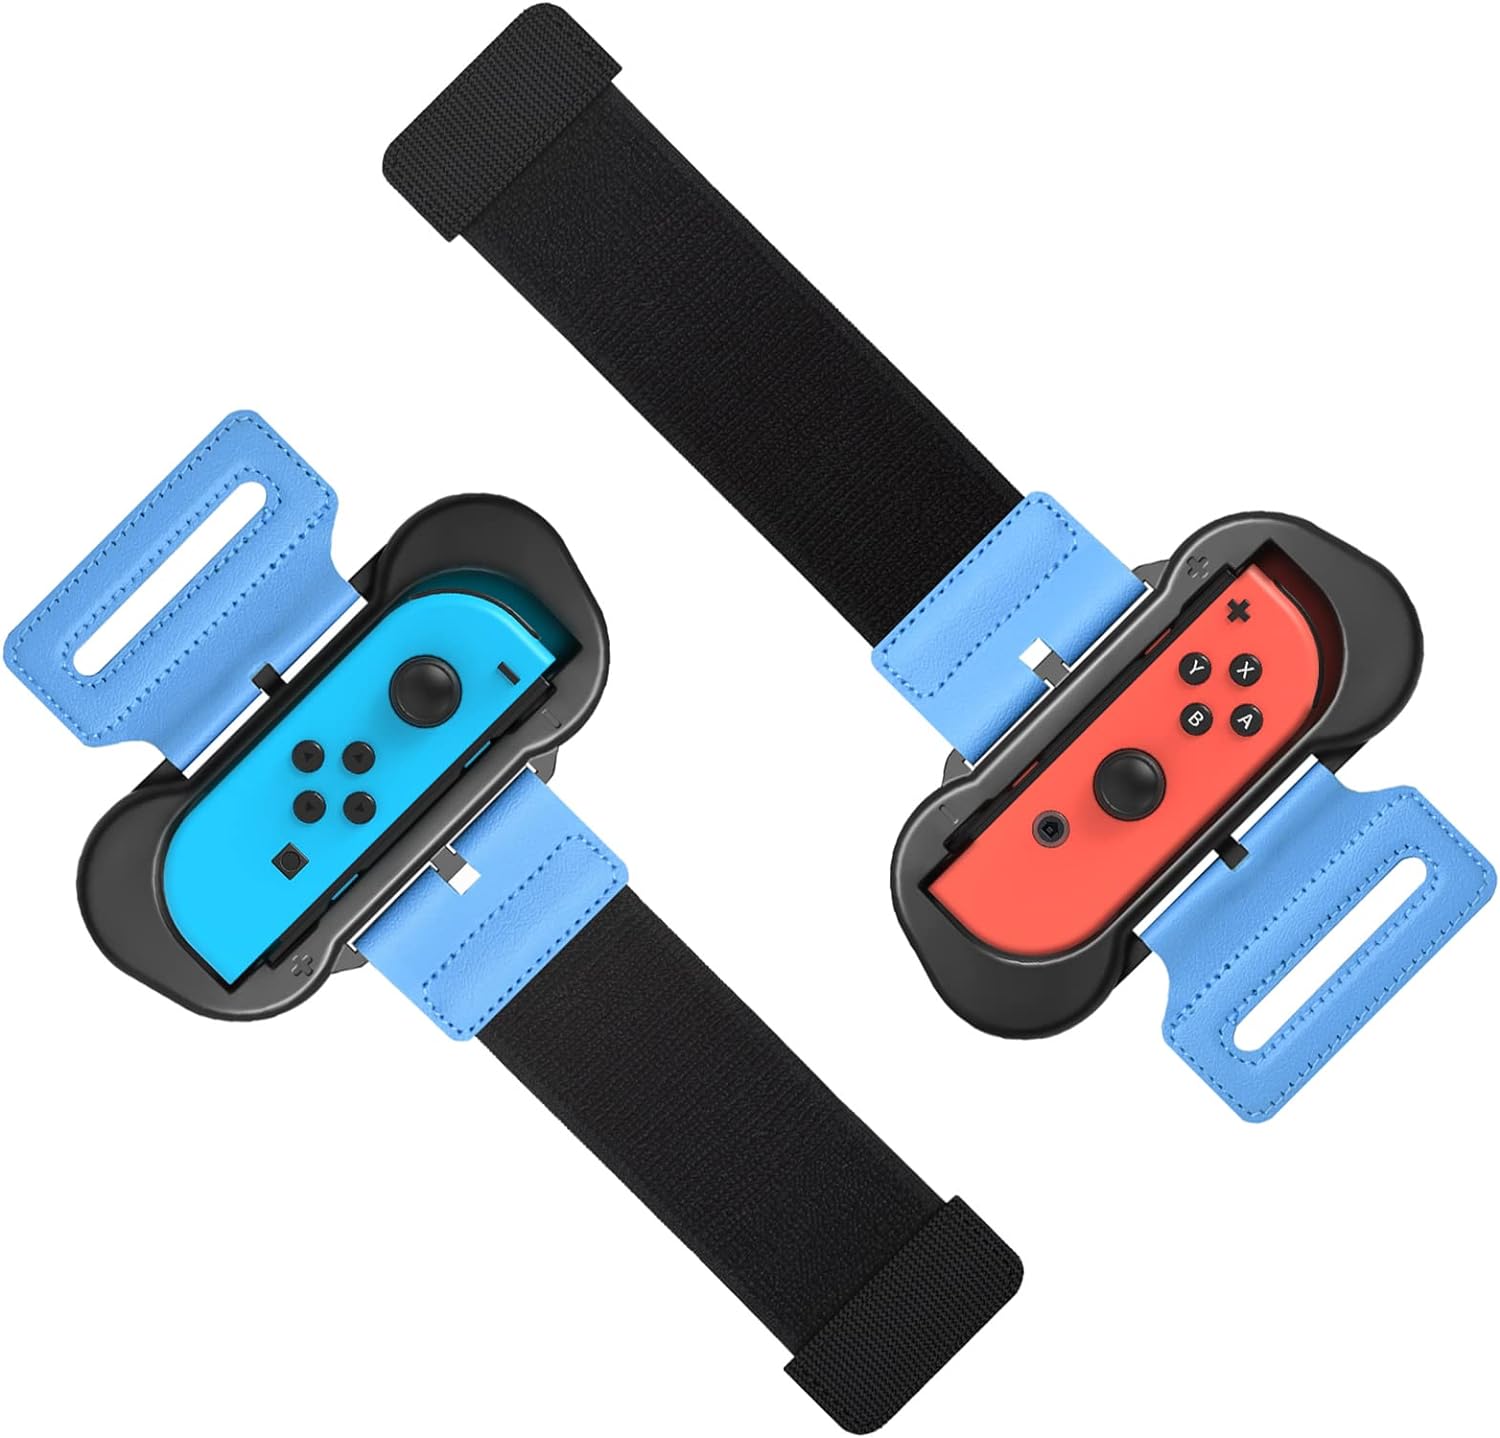 Wrist Bands Compatible with Switch Dance 2024 2023 2022/for Zumba Burn It Up for Nintendo Switch & Swith OLED Model for Joy-Cons,Adjustable Elastic Strap, Two Size for Adults & Children,2 Pack Black